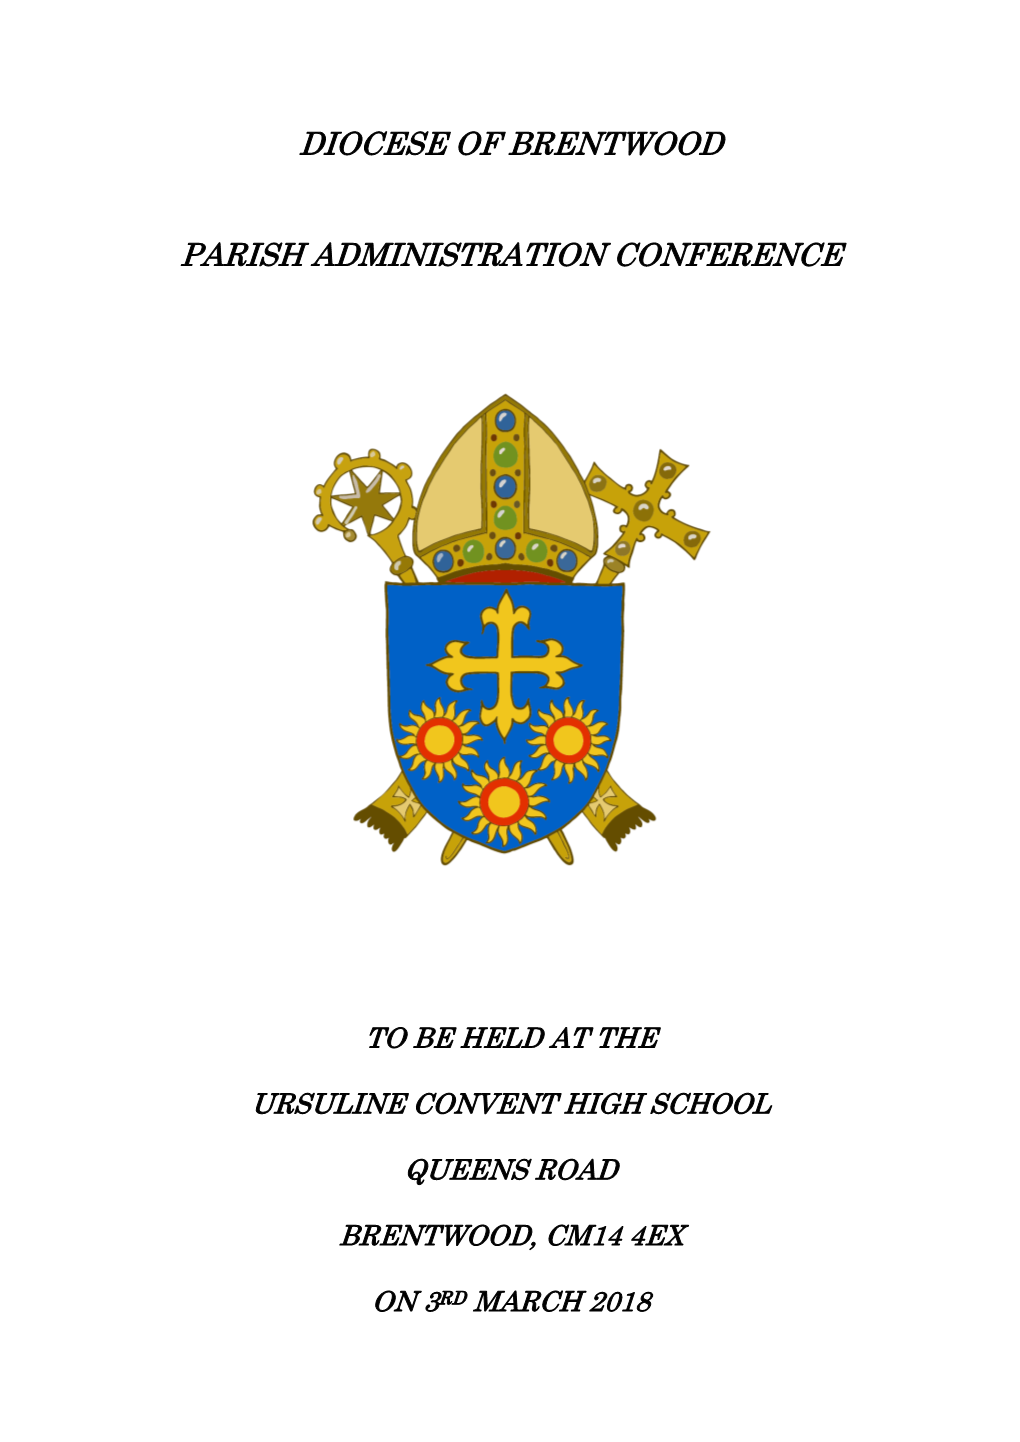 Diocese of Brentwood Parish Administration Conference